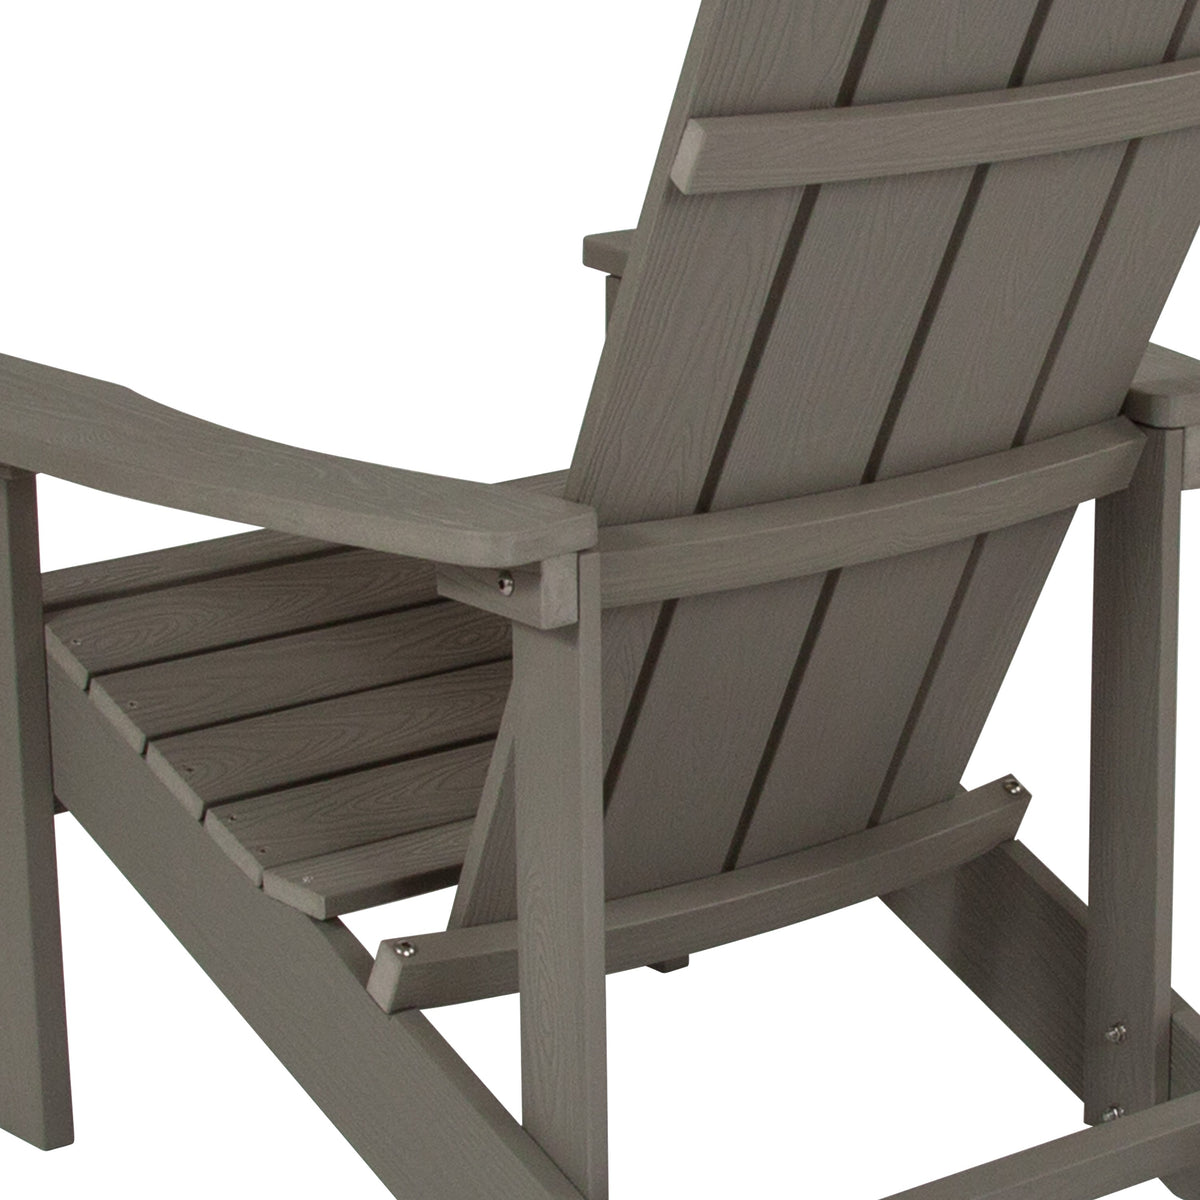 Gray |#| Outdoor Gray All-Weather Poly Resin Wood Adirondack Chair